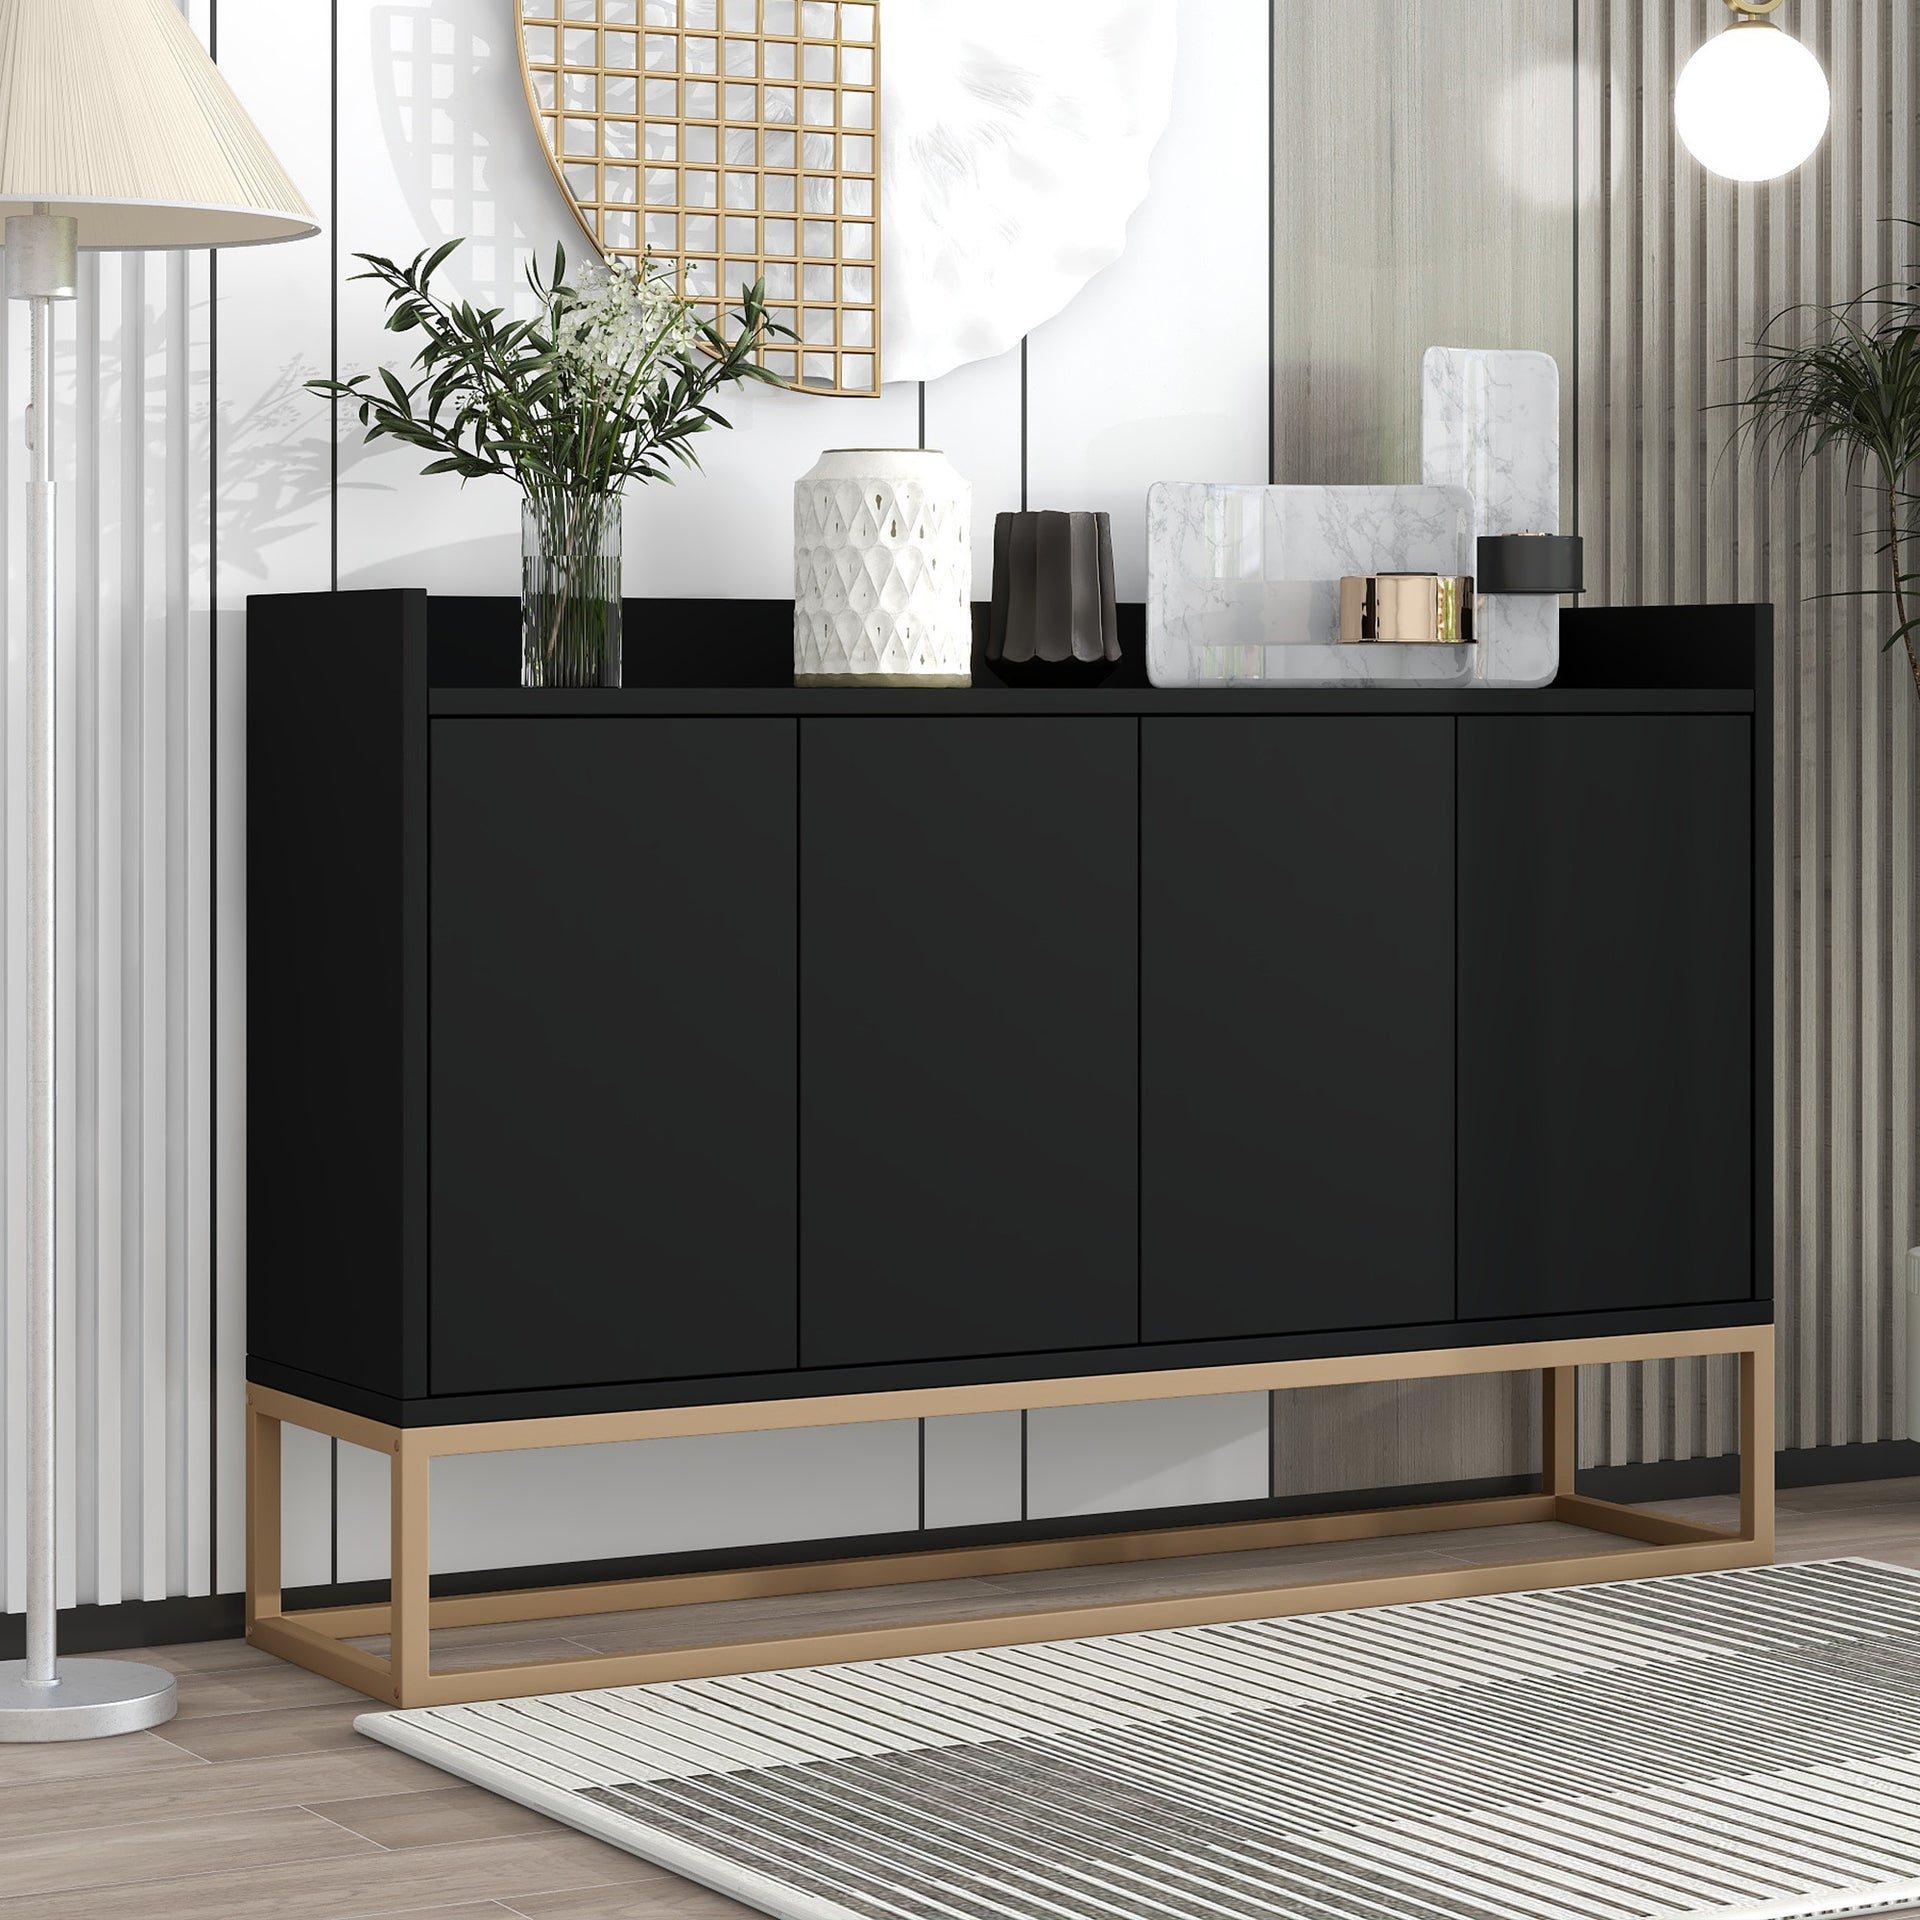 Modern Sideboard Elegant Storage Cabinet for Office with Large Storage Space for Serving Bar,  Glasses, Books and more (Black)